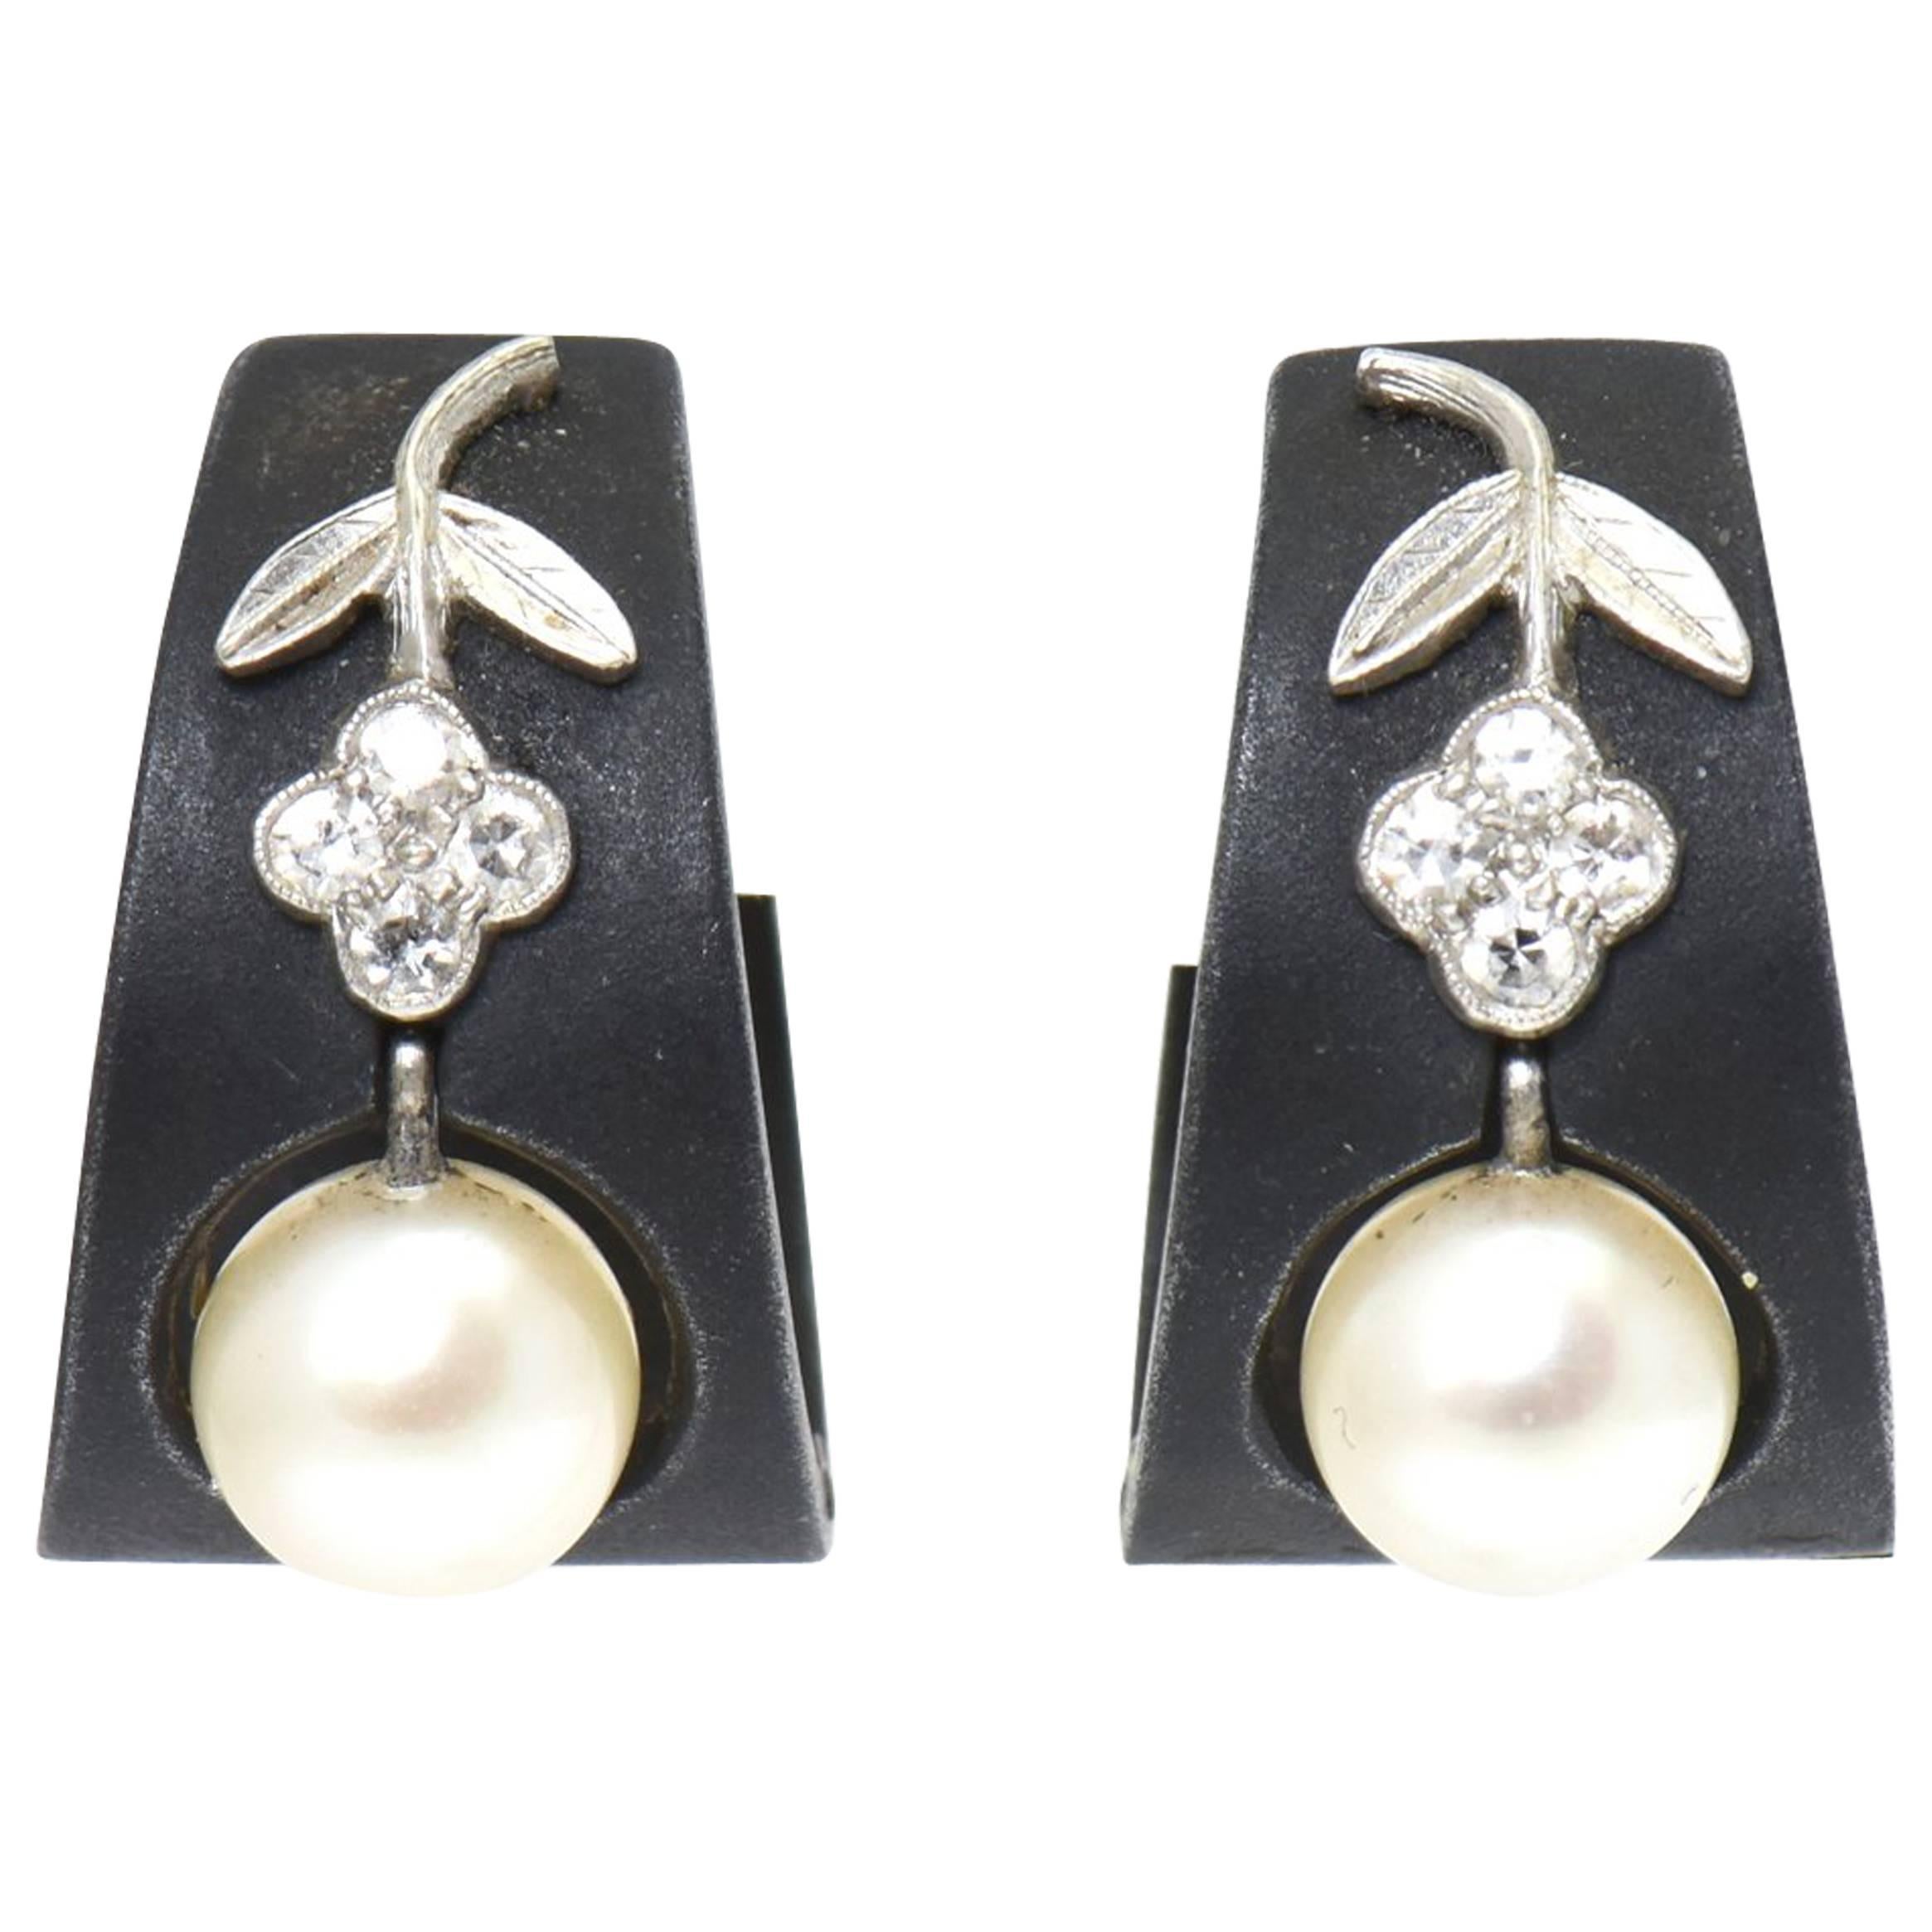 Marsh & Co. Steel, Diamond, Cultured Pearl and White Gold Earrings, circa 1930s